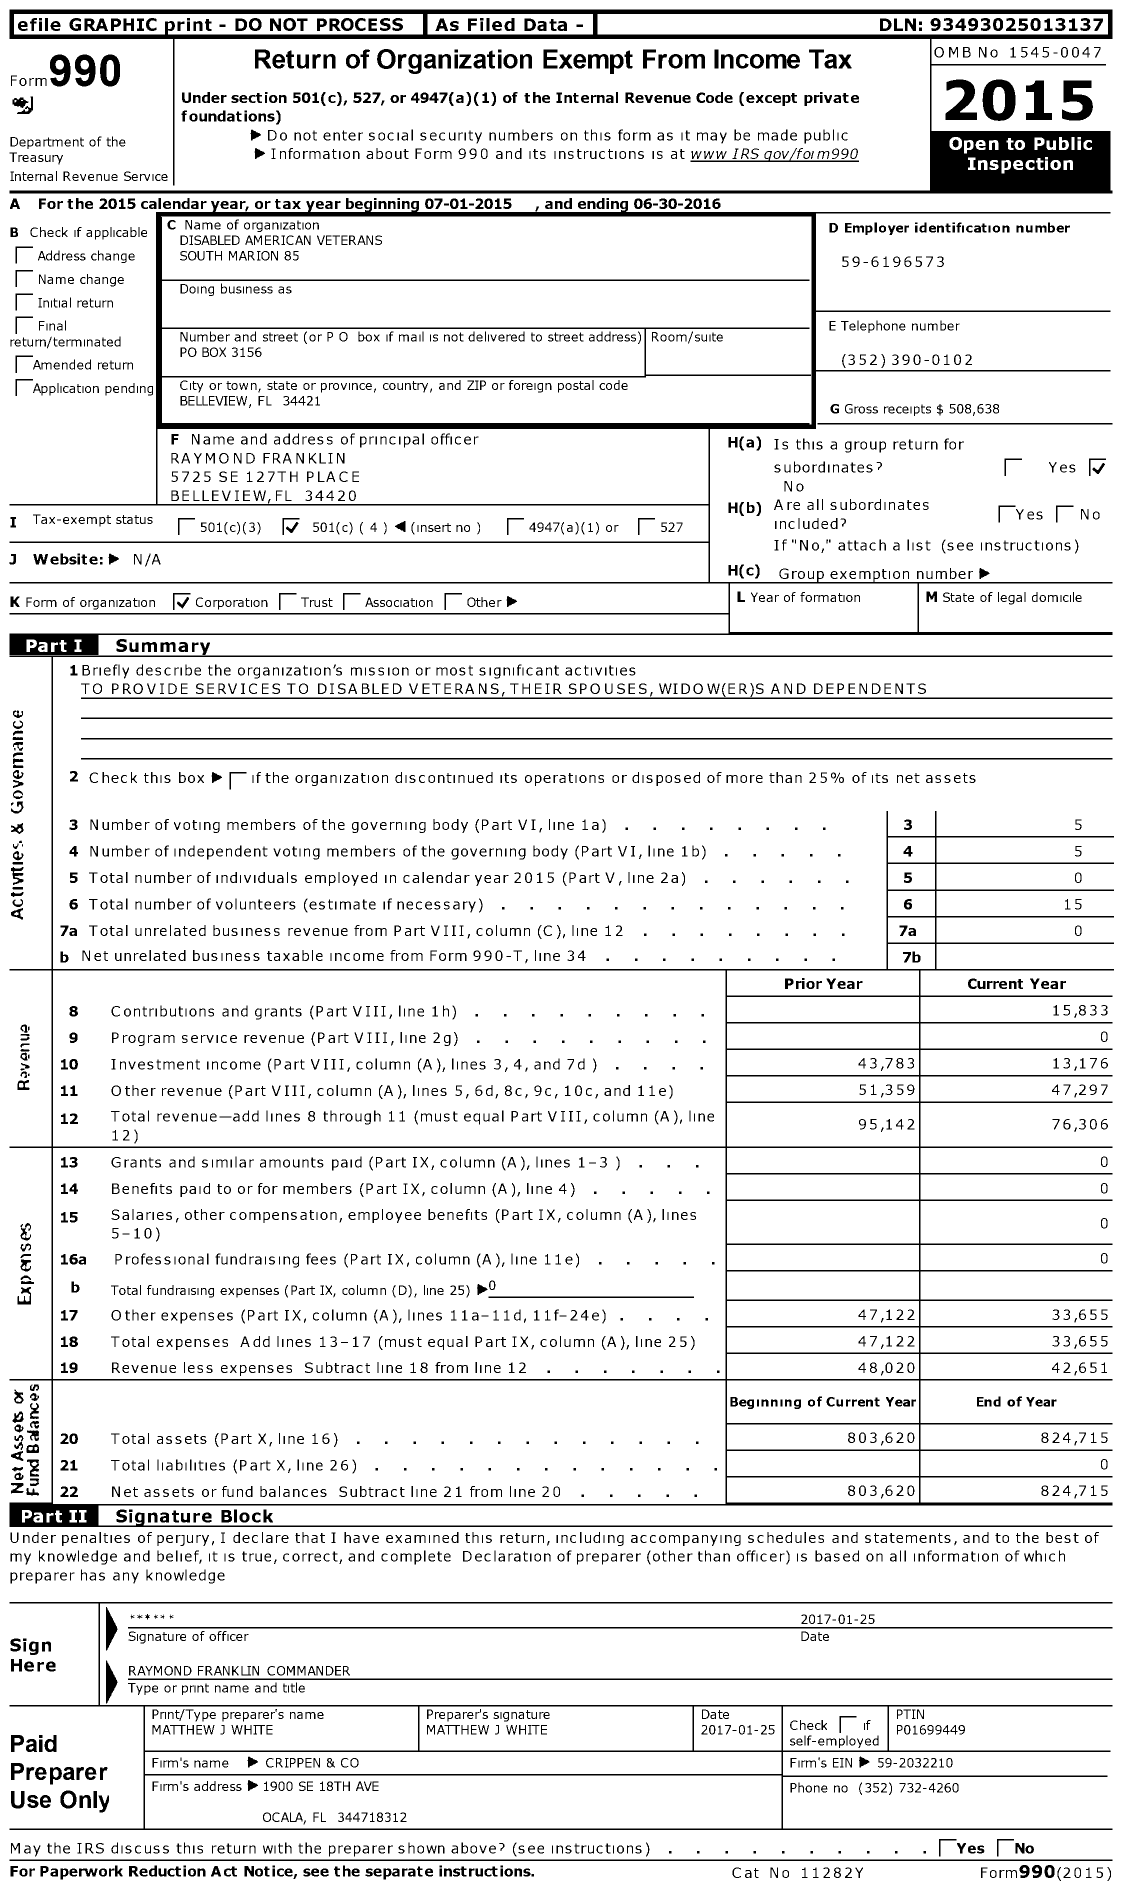 Image of first page of 2015 Form 990O for Disabled American Veterans South Marion 85